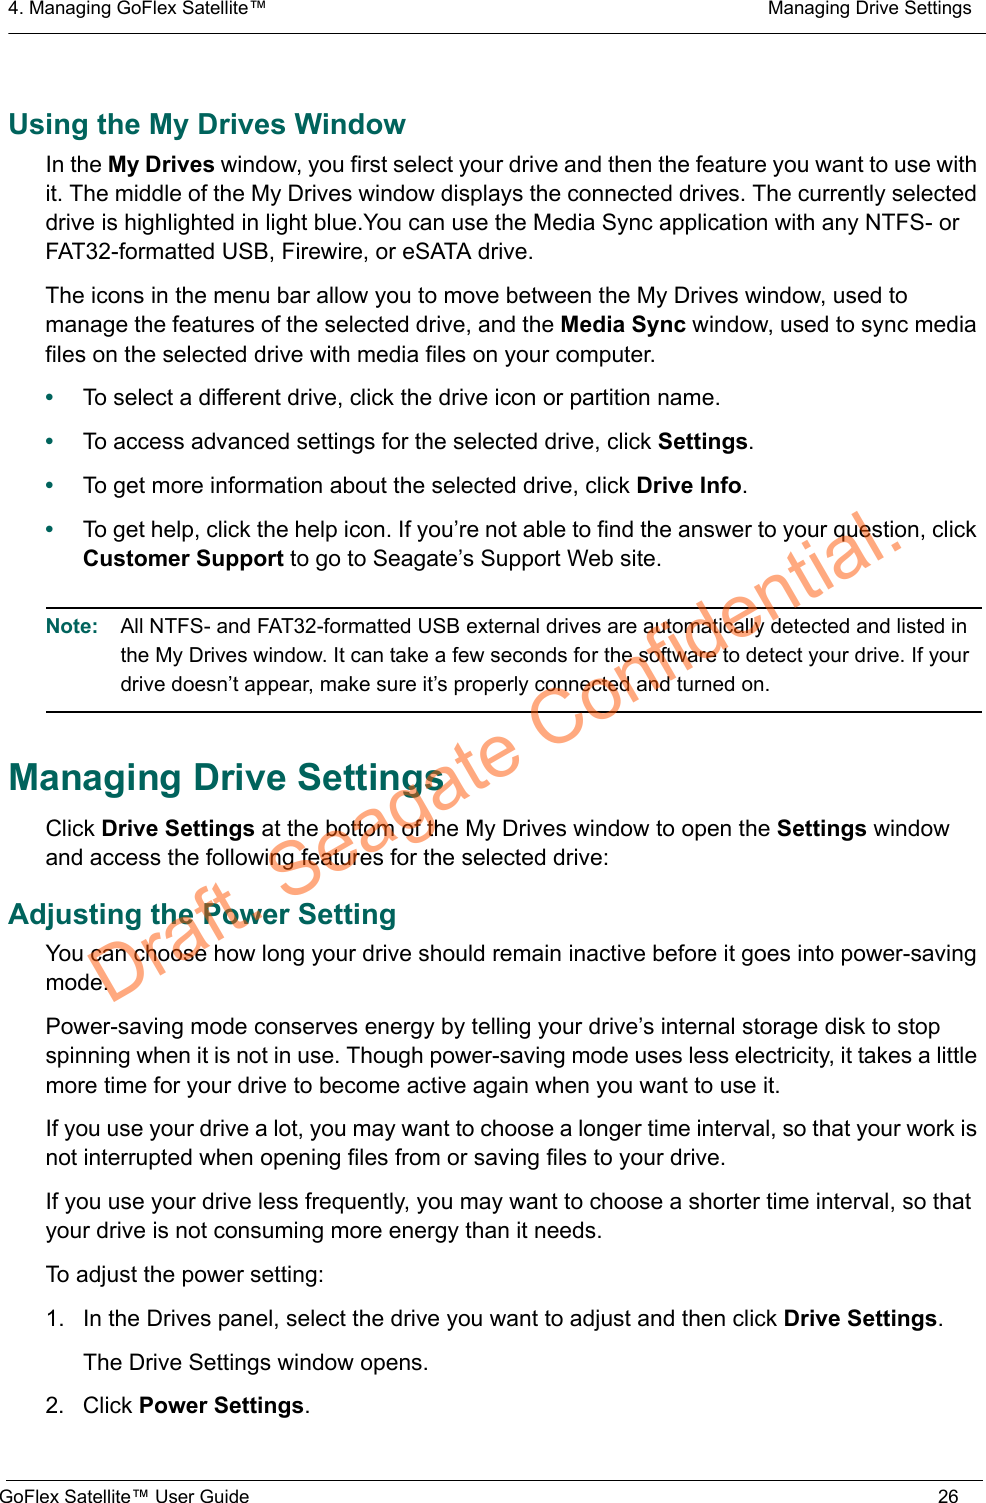 4. Managing GoFlex Satellite™  Managing Drive SettingsGoFlex Satellite™ User Guide 26Using the My Drives WindowIn the My Drives window, you first select your drive and then the feature you want to use with it. The middle of the My Drives window displays the connected drives. The currently selected drive is highlighted in light blue.You can use the Media Sync application with any NTFS- or FAT32-formatted USB, Firewire, or eSATA drive.The icons in the menu bar allow you to move between the My Drives window, used to manage the features of the selected drive, and the Media Sync window, used to sync media files on the selected drive with media files on your computer.•To select a different drive, click the drive icon or partition name.•To access advanced settings for the selected drive, click Settings.•To get more information about the selected drive, click Drive Info.•To get help, click the help icon. If you’re not able to find the answer to your question, click Customer Support to go to Seagate’s Support Web site.Note:  All NTFS- and FAT32-formatted USB external drives are automatically detected and listed in the My Drives window. It can take a few seconds for the software to detect your drive. If your drive doesn’t appear, make sure it’s properly connected and turned on.Managing Drive SettingsClick Drive Settings at the bottom of the My Drives window to open the Settings window and access the following features for the selected drive:Adjusting the Power SettingYou can choose how long your drive should remain inactive before it goes into power-saving mode.Power-saving mode conserves energy by telling your drive’s internal storage disk to stop spinning when it is not in use. Though power-saving mode uses less electricity, it takes a little more time for your drive to become active again when you want to use it.If you use your drive a lot, you may want to choose a longer time interval, so that your work is not interrupted when opening files from or saving files to your drive.If you use your drive less frequently, you may want to choose a shorter time interval, so that your drive is not consuming more energy than it needs.To adjust the power setting:1. In the Drives panel, select the drive you want to adjust and then click Drive Settings.The Drive Settings window opens.2. Click Power Settings.Draft. Seagate Confidential.